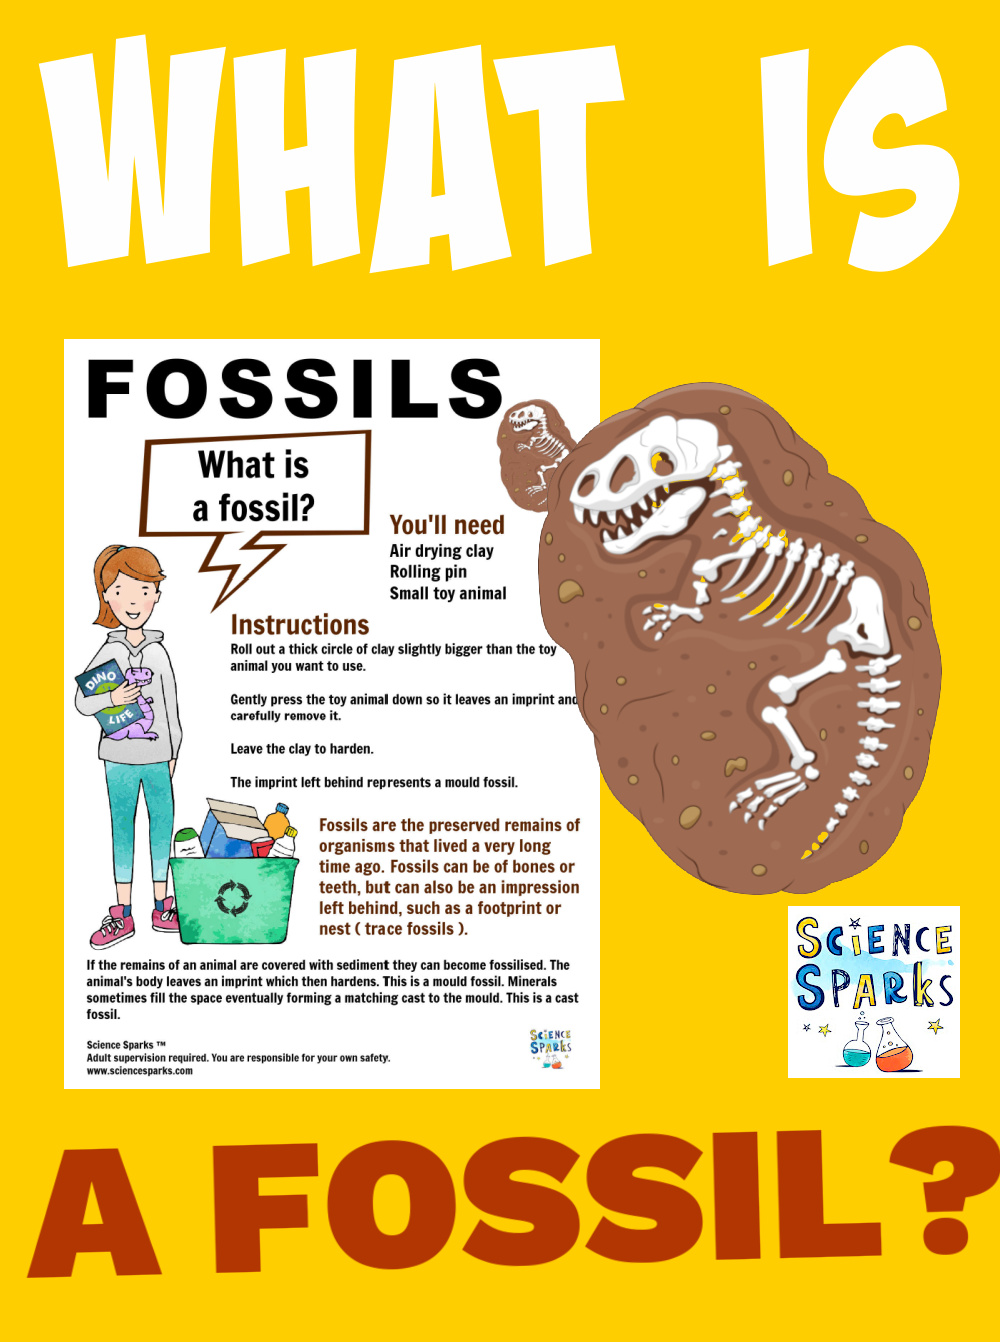 Image of a fossil making activity for learning about fossils